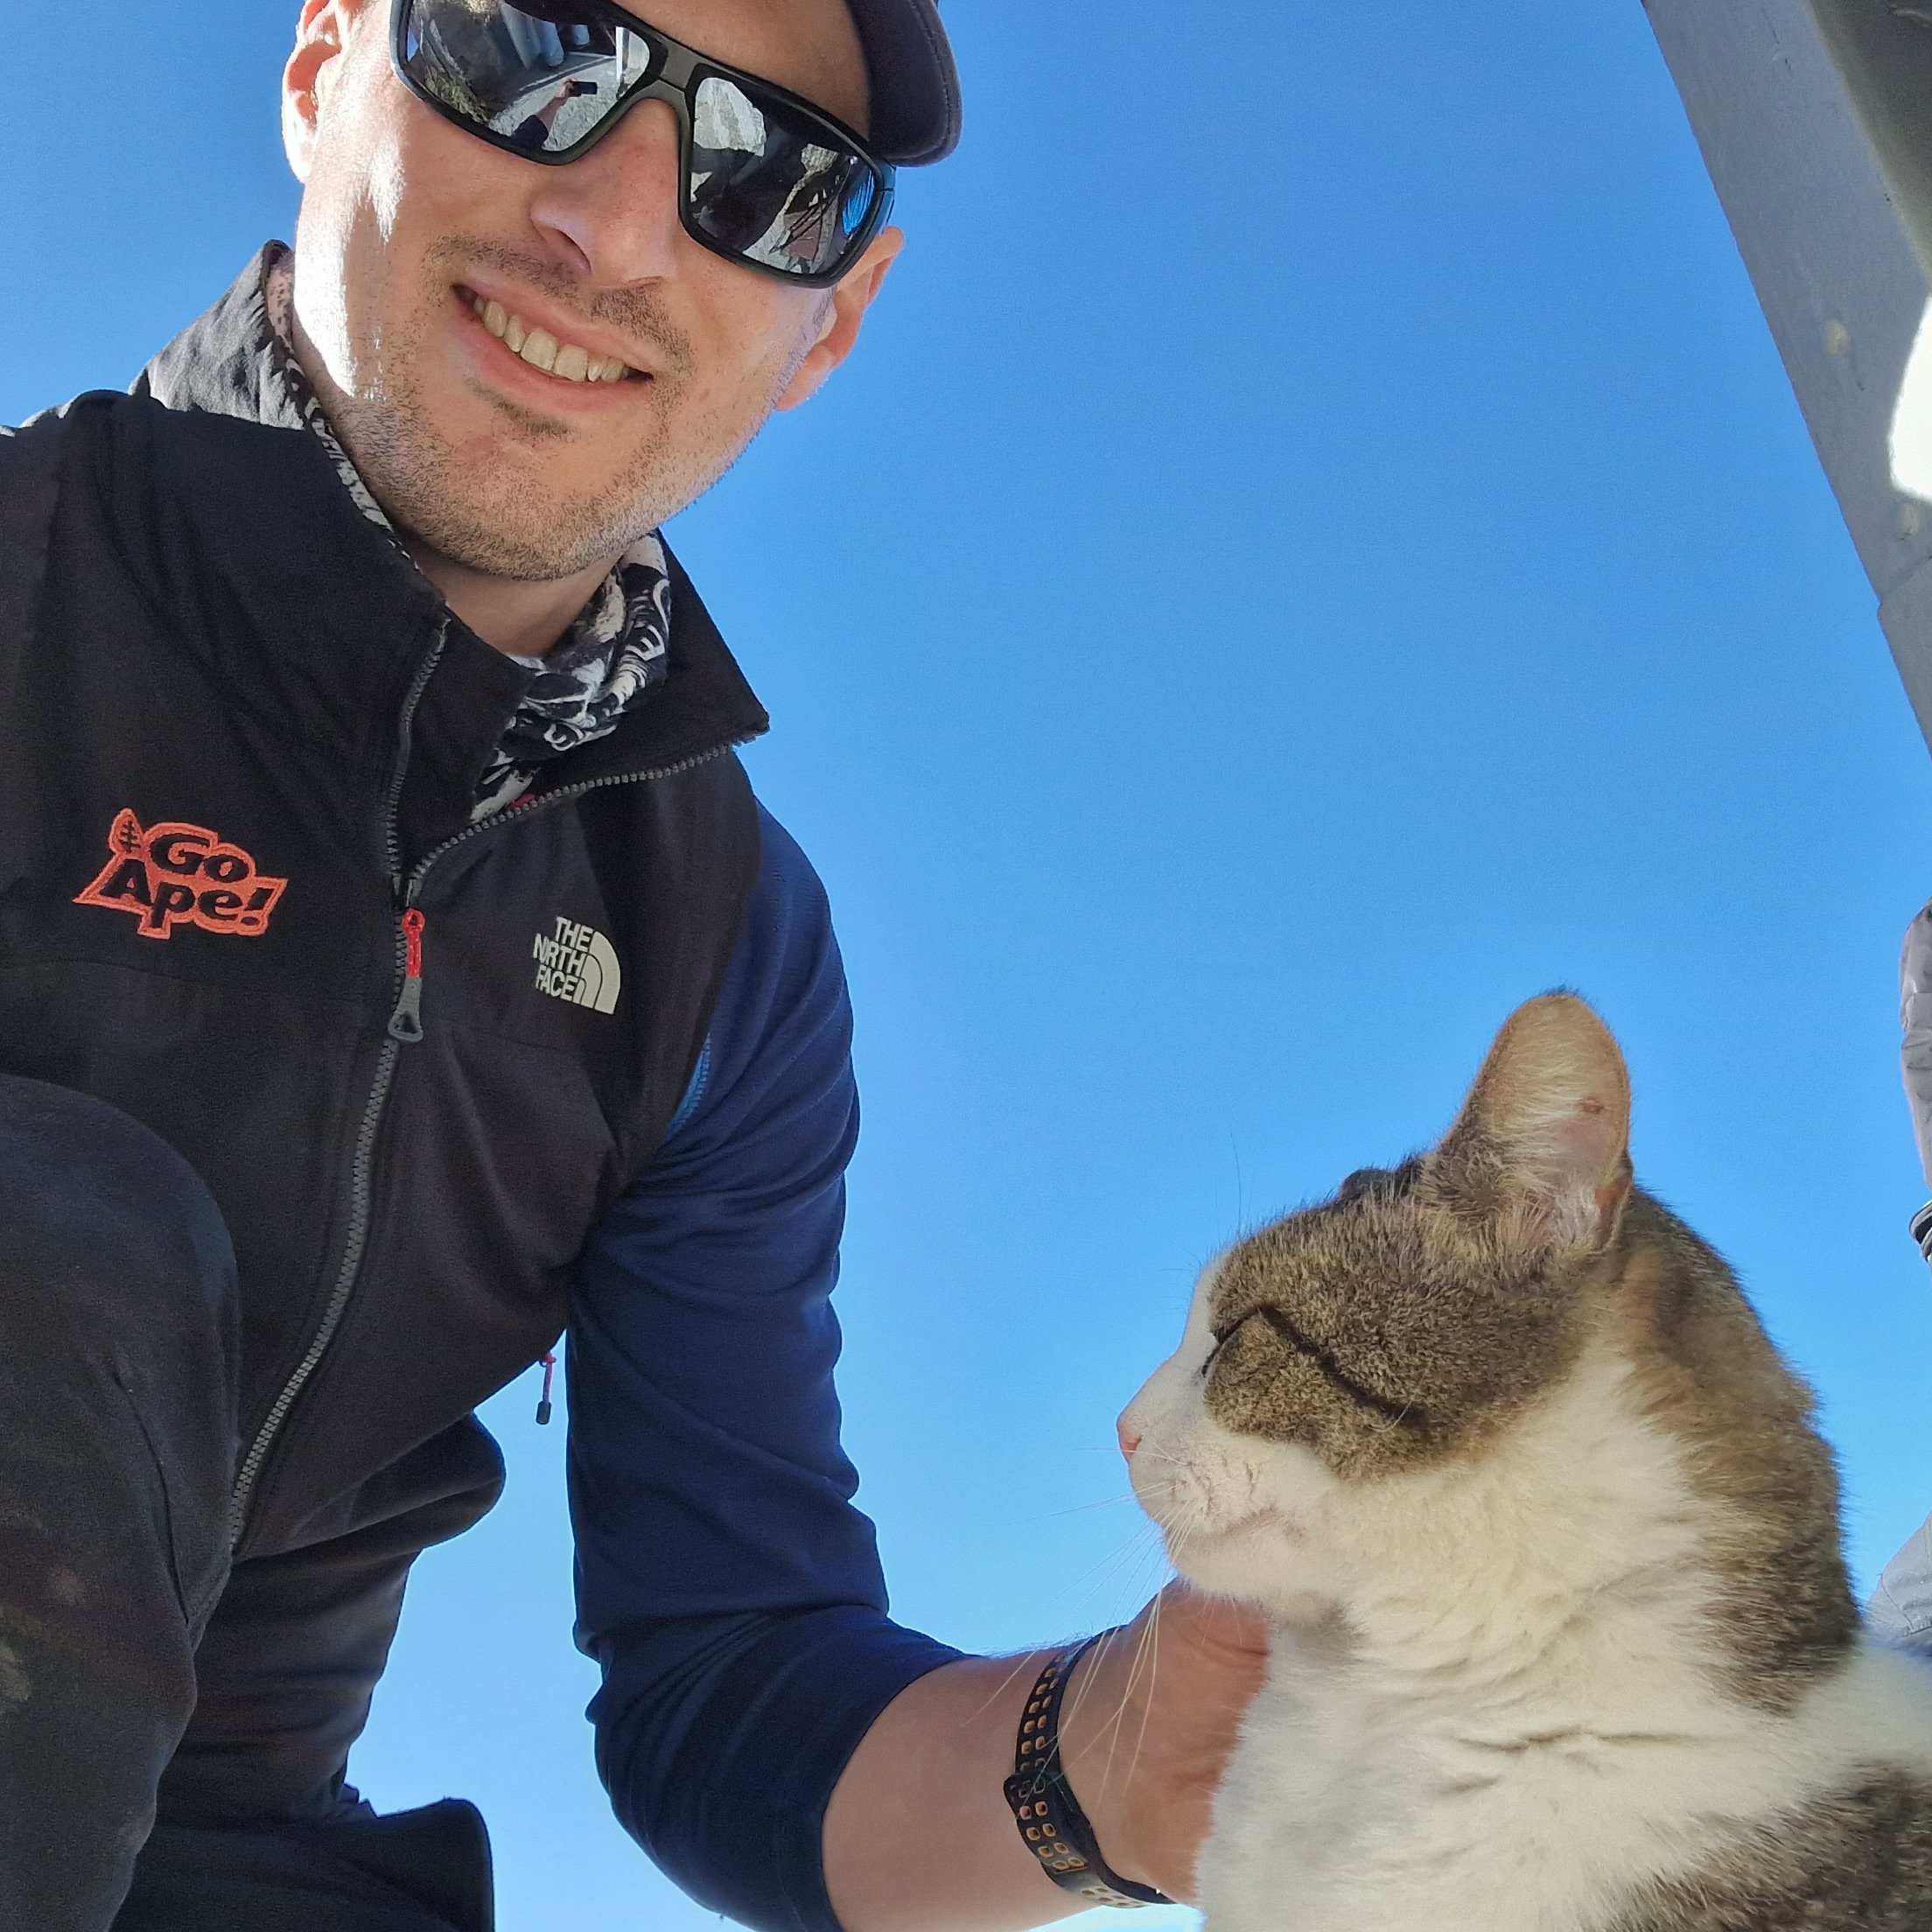 Go Ape co-owner and TEN Trek Musala team member Charlie on the mountain summit with the resident cat